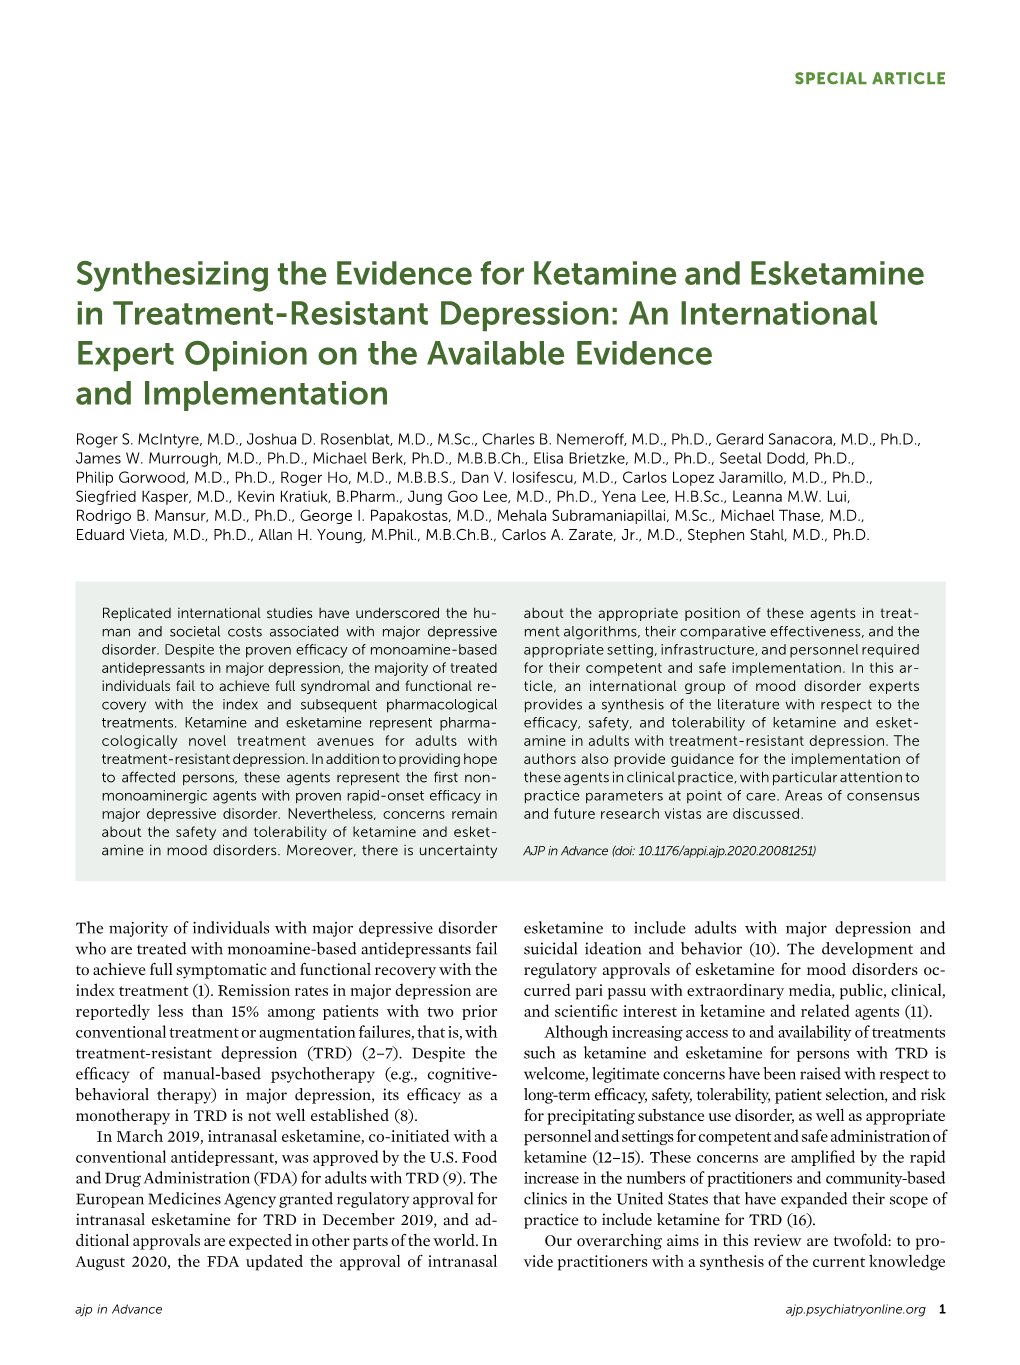 Synthesizing the Evidence for Ketamine and Esketamine in Treatment-Resistant Depression: an International Expert Opinion on the Available Evidence and Implementation